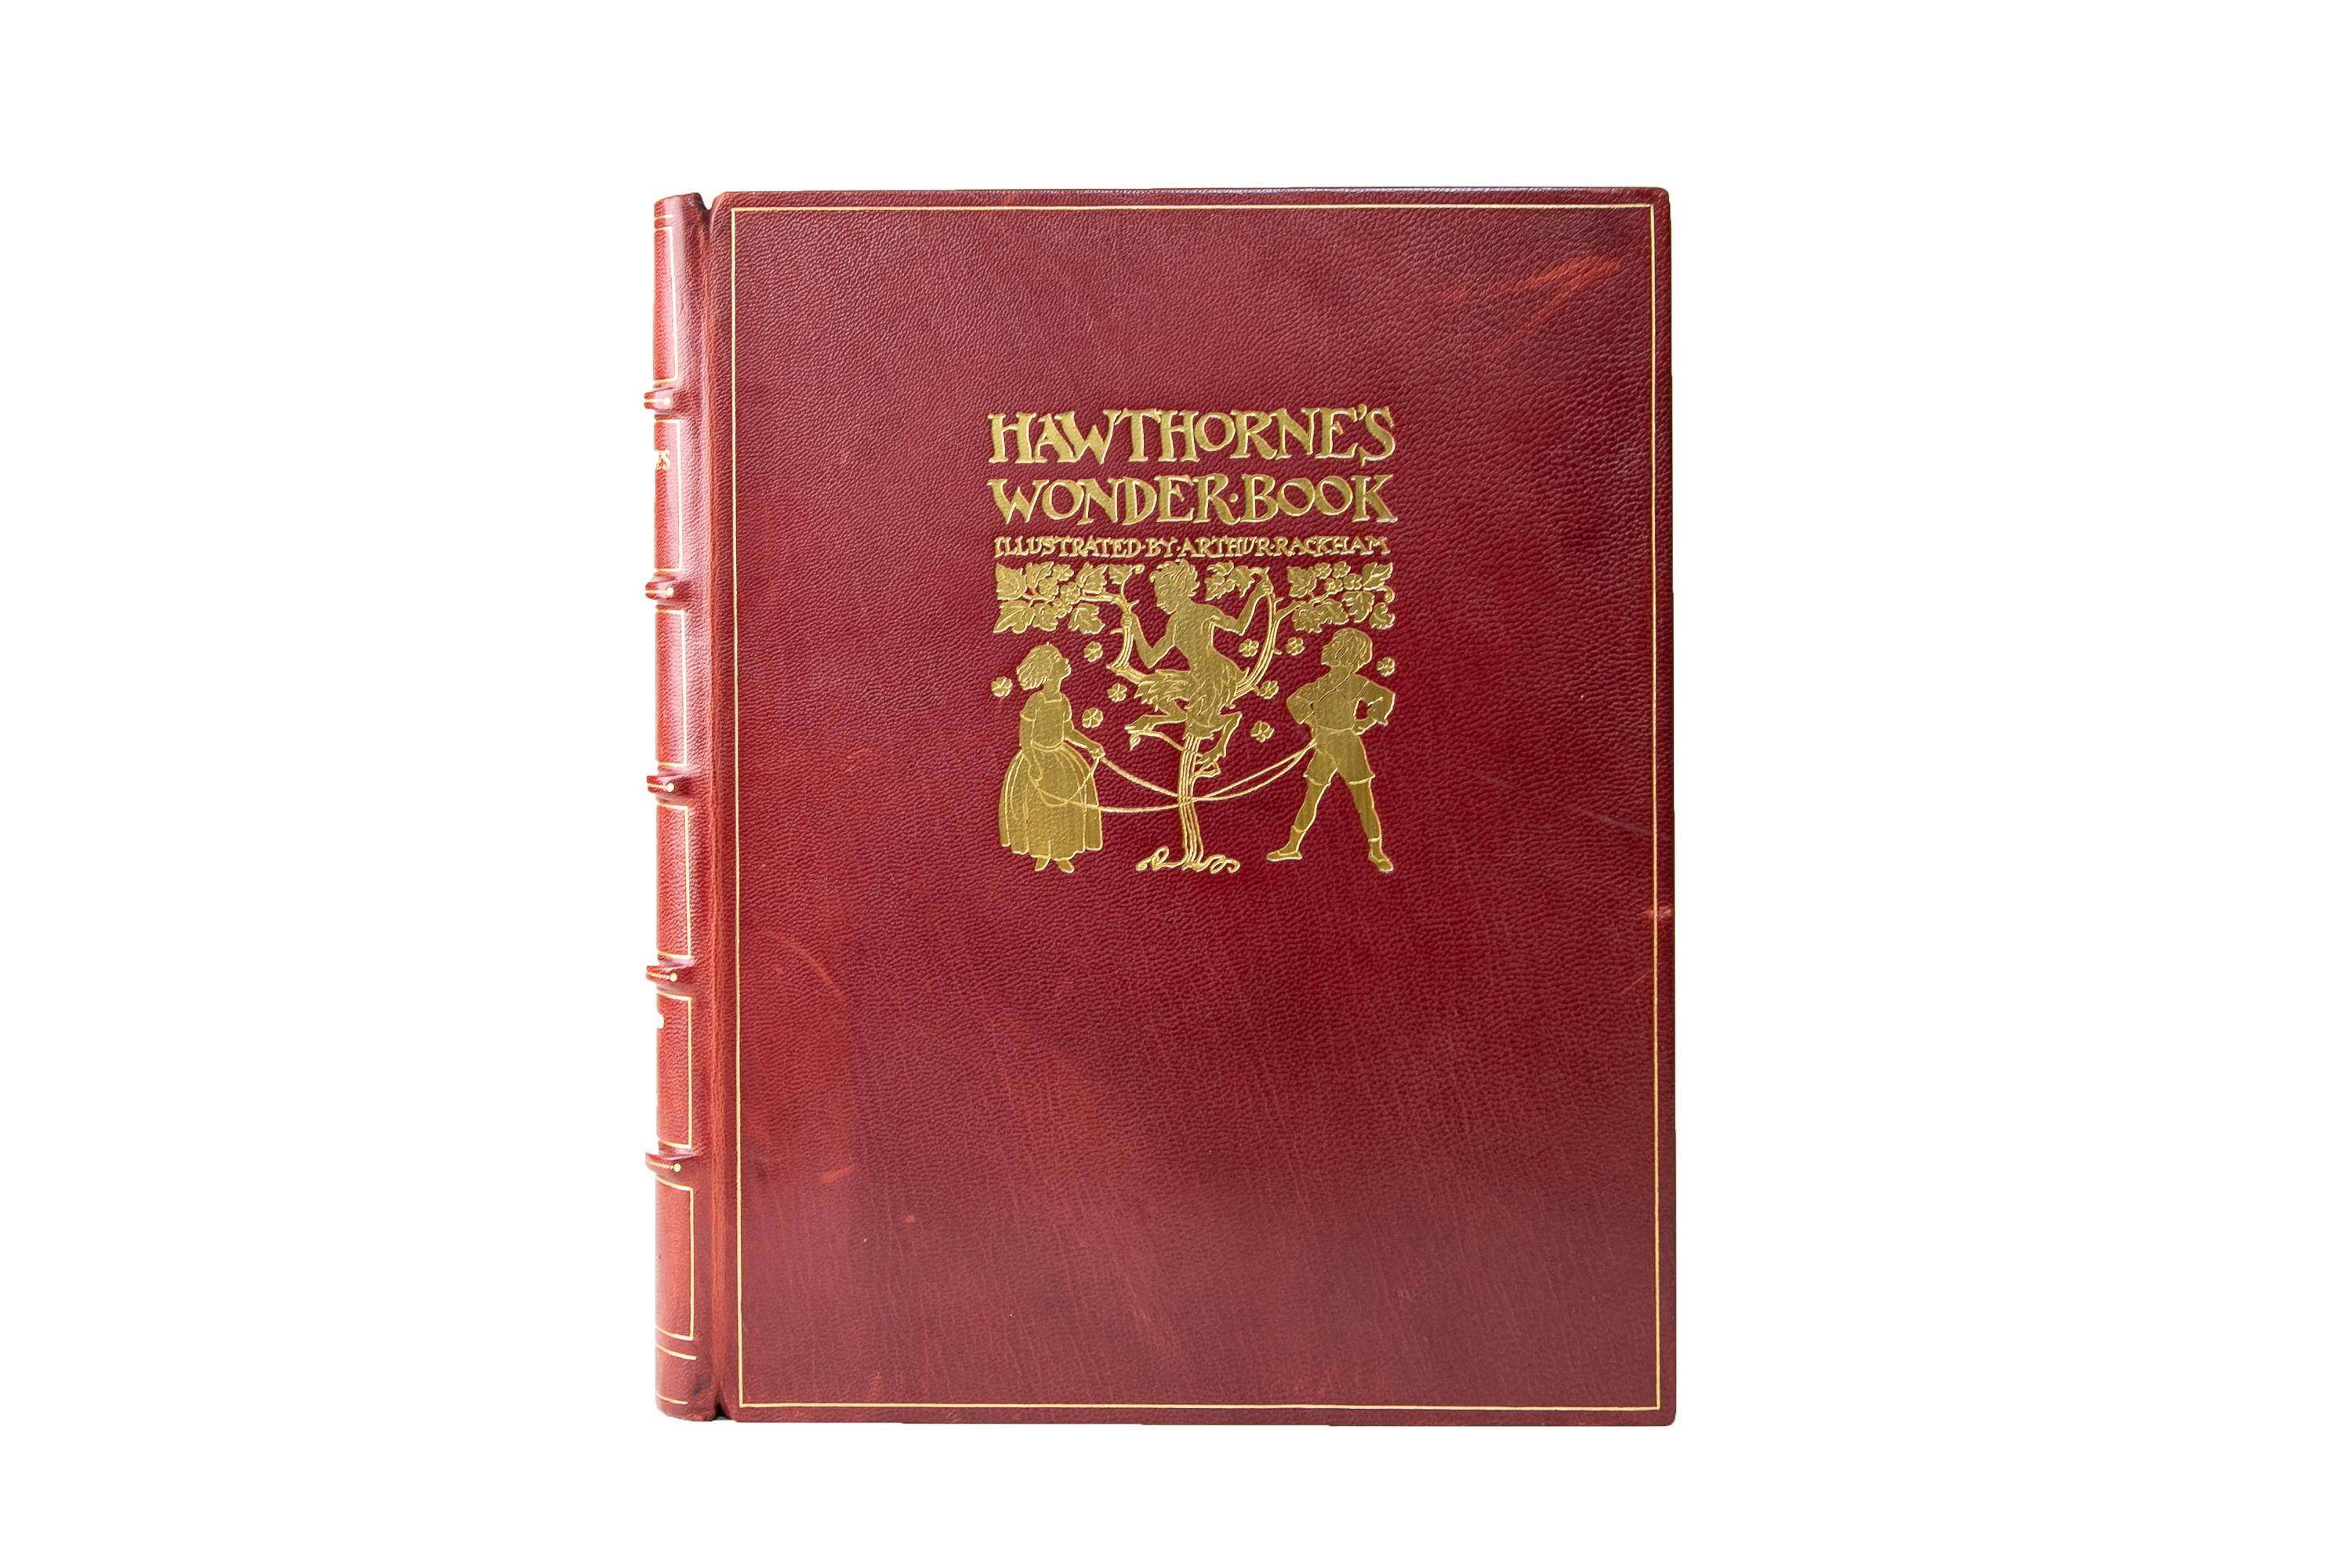 1 Volume. Nathaniel Hawthorne, Wonder Book. Limited Edition. Bound by the Chelsea Bindery in full red morocco with the cover displaying a gilt-tooled border, 3 figures including one elf in a tree, and title lettering, all gilt-tooled. The spine